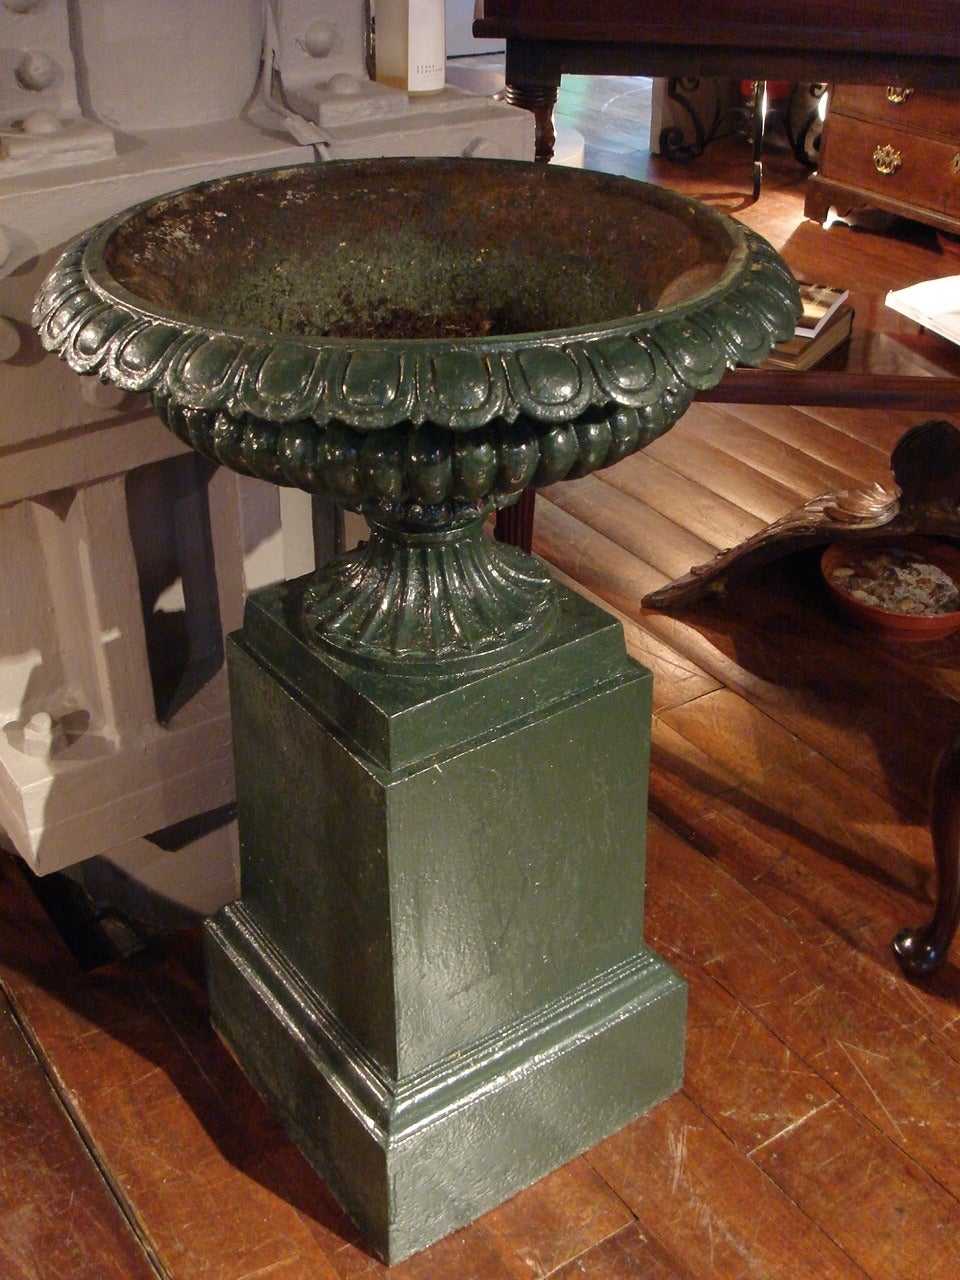 Of classical circular tazza form on square bases, painted a dark green.